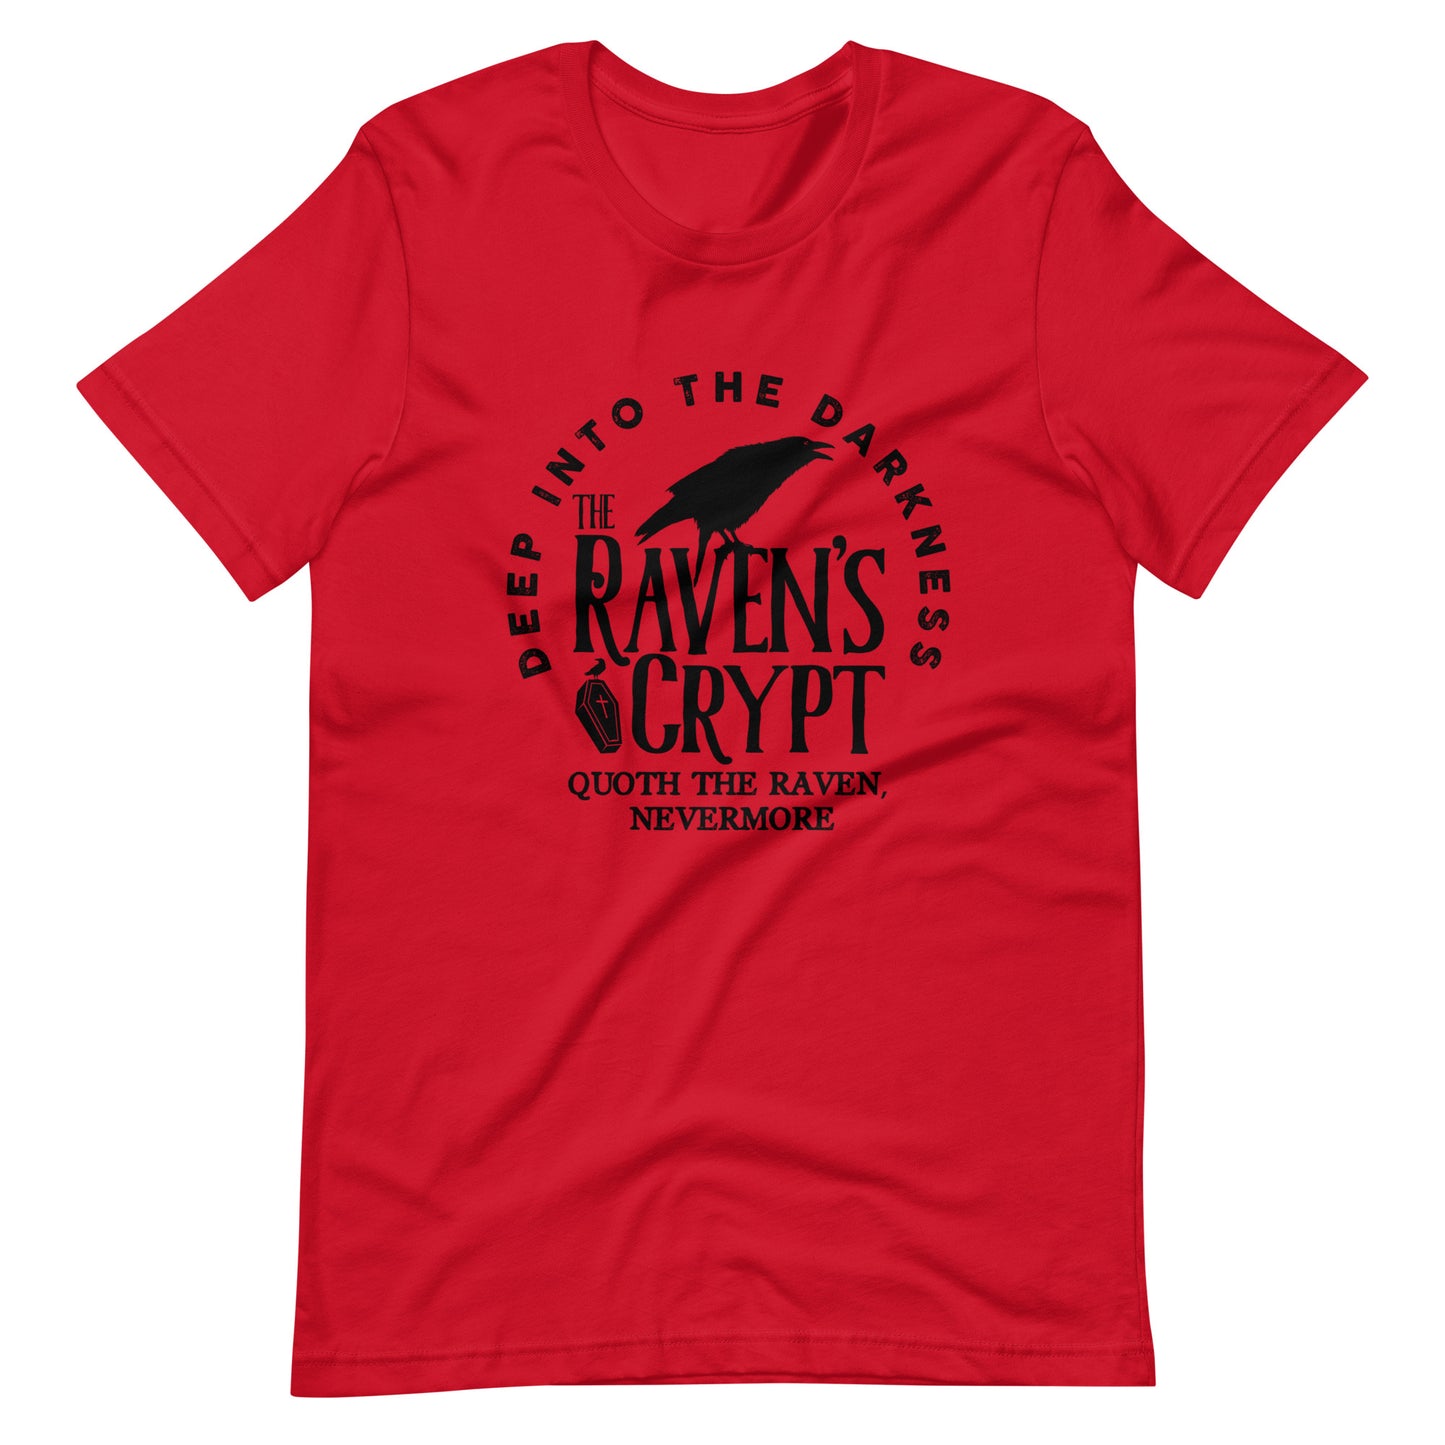 Deep Into the Darkness The Raven's Crypt - Men's t-shirt Red Front